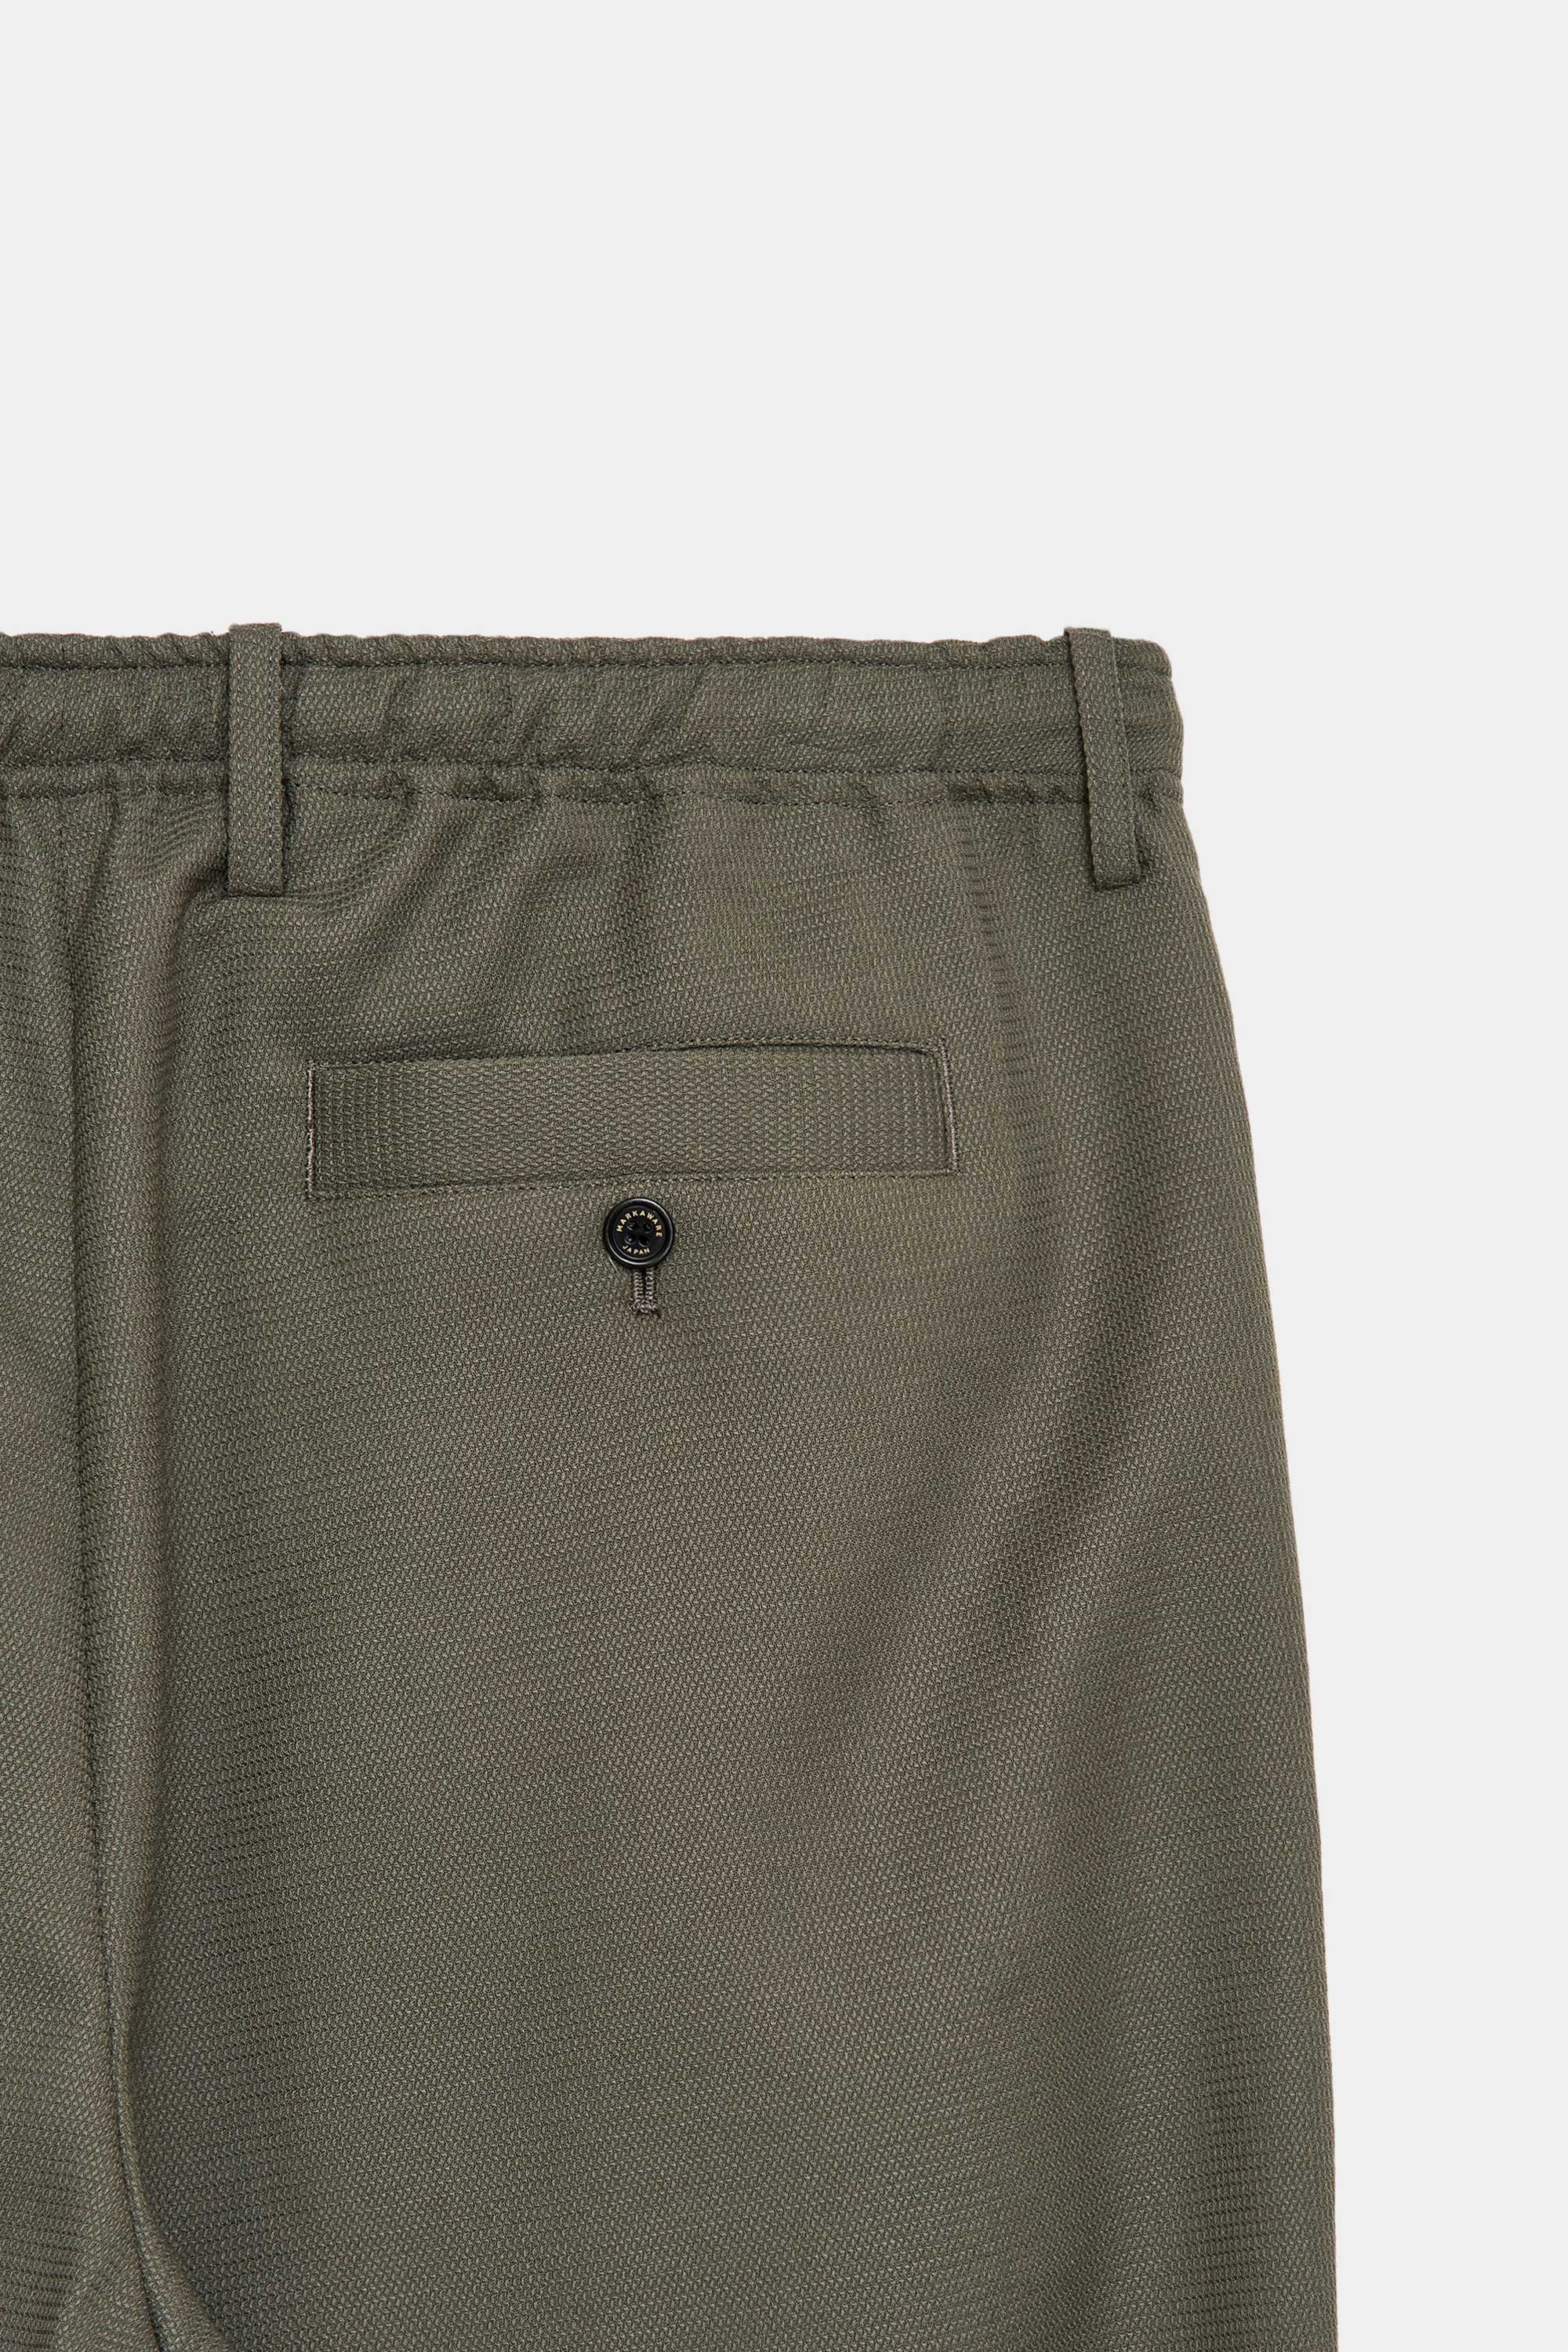 ORGANIC WOOL HONEYCOMB COMFORT FIT EASY TROUSERS, Sage Green